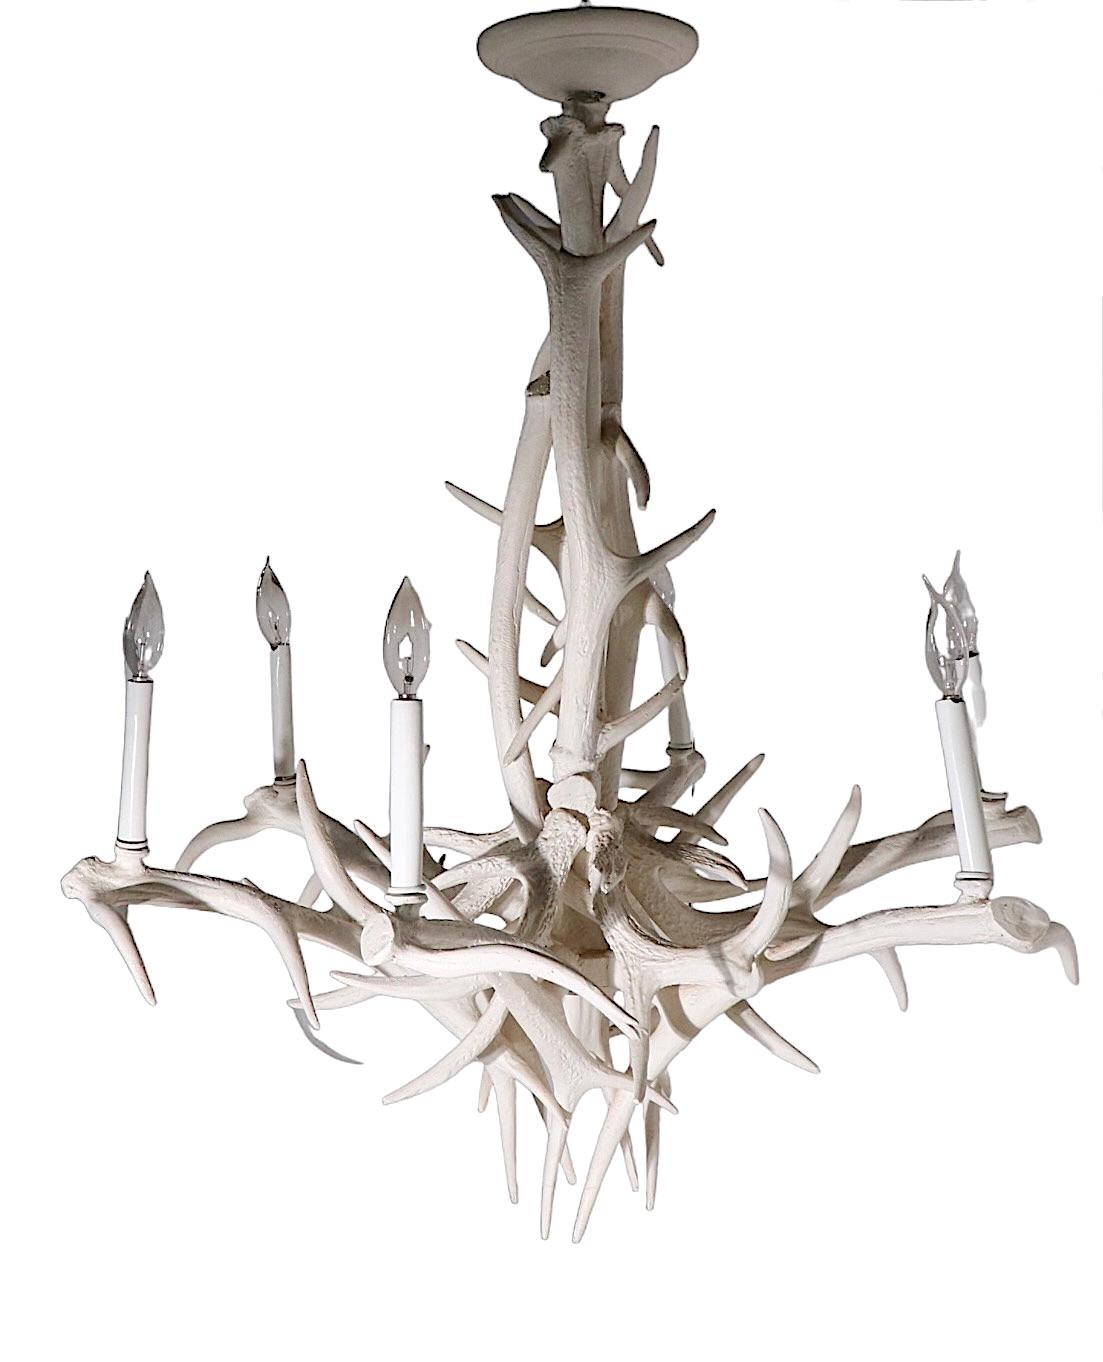 Intriguing faux antler fixture of cast aluminum in antique white on white finish. The chandelier features six candle light bulbs which accept standard screw in bulbs, it is in good working condition, ready to install.